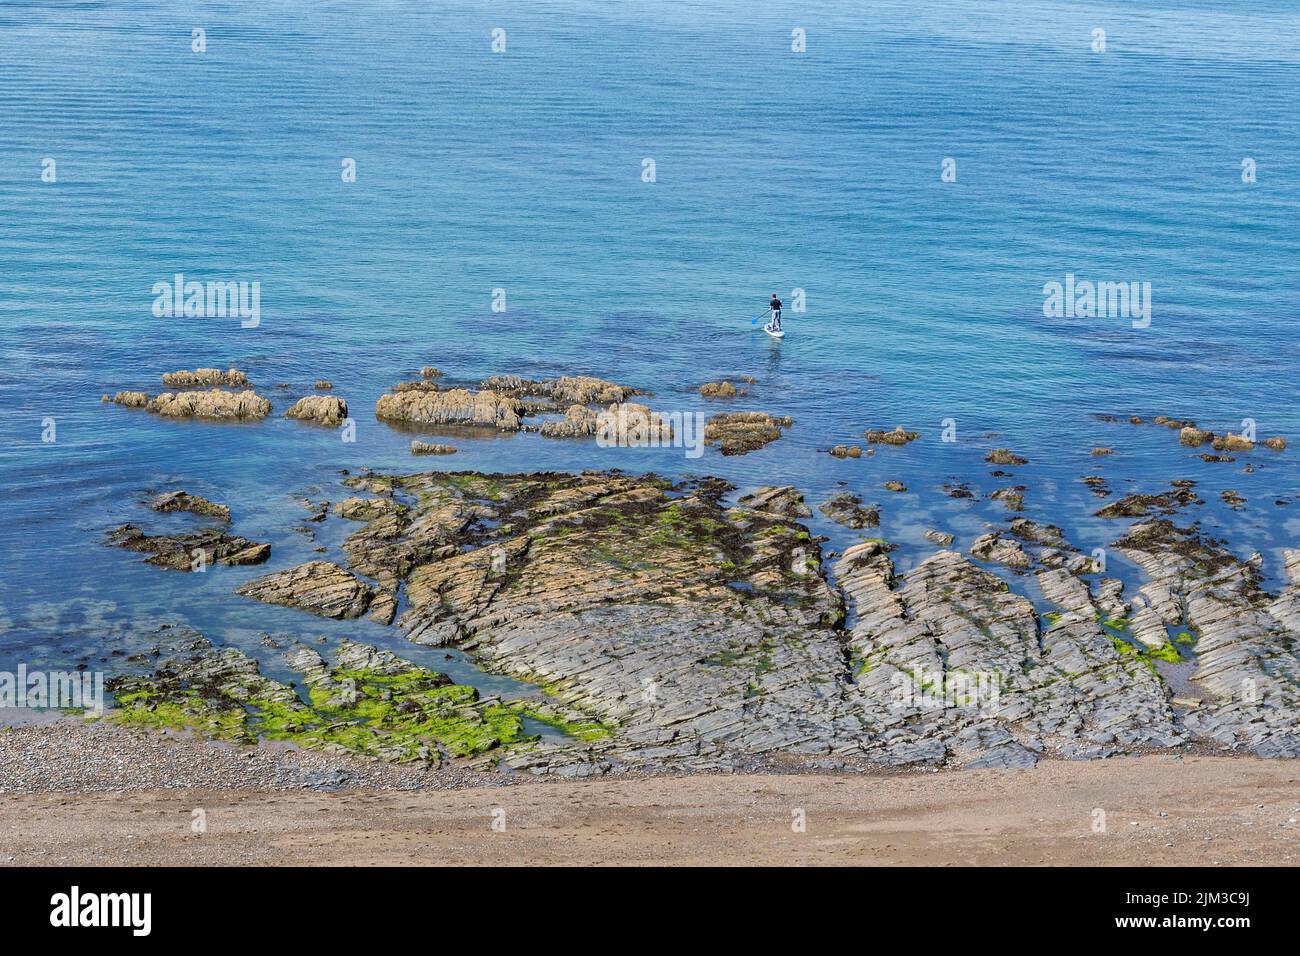 A man paddle boarding in the sea by a rocky shoreline. Health, fitness,holiday, recreation, solitude concept. Stock Photo